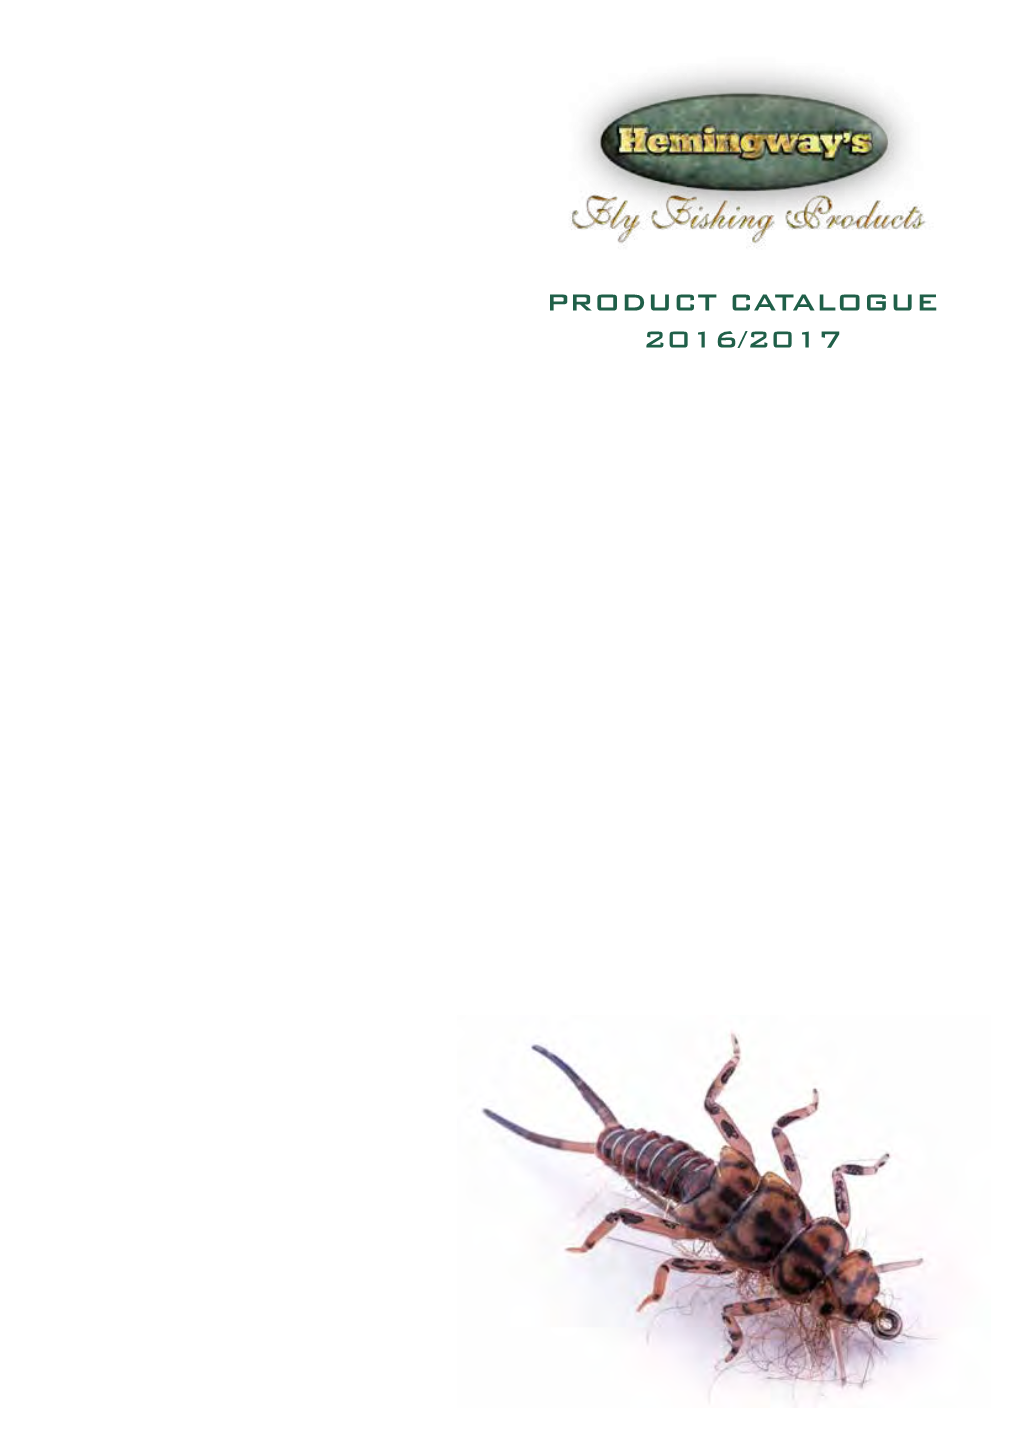 Product Catalogue 2016/2017 Contents